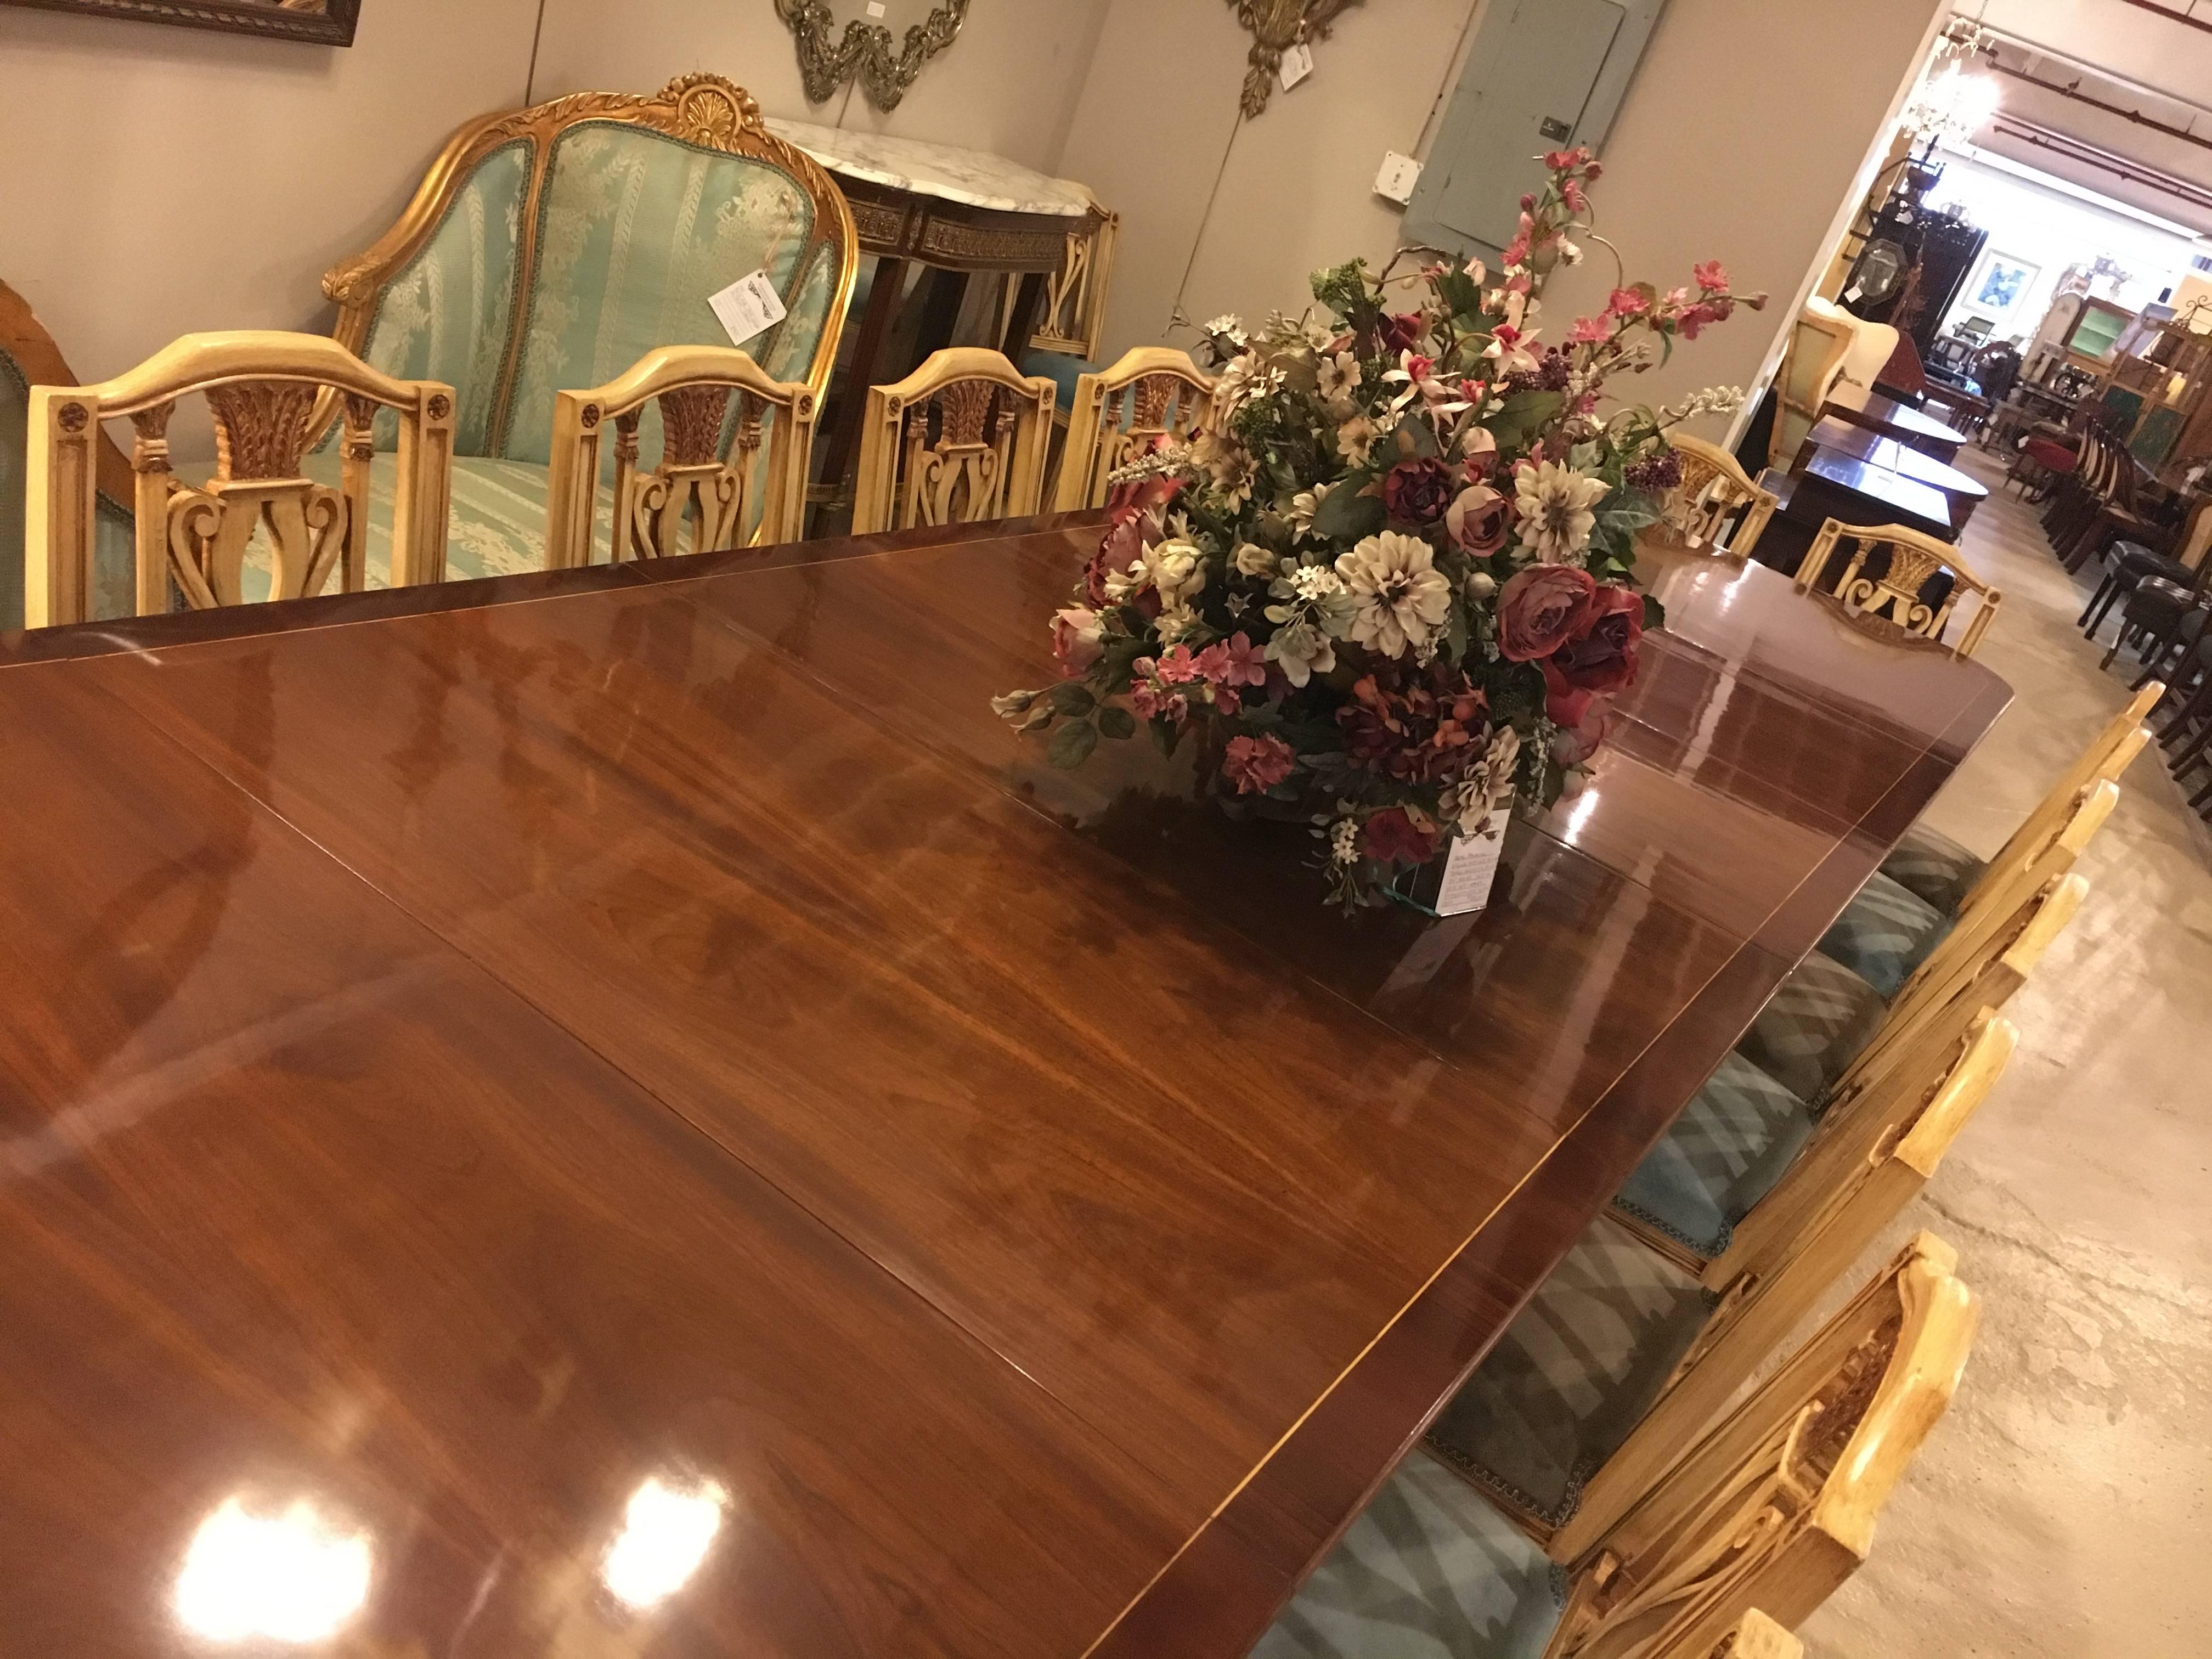 16 foot dining table